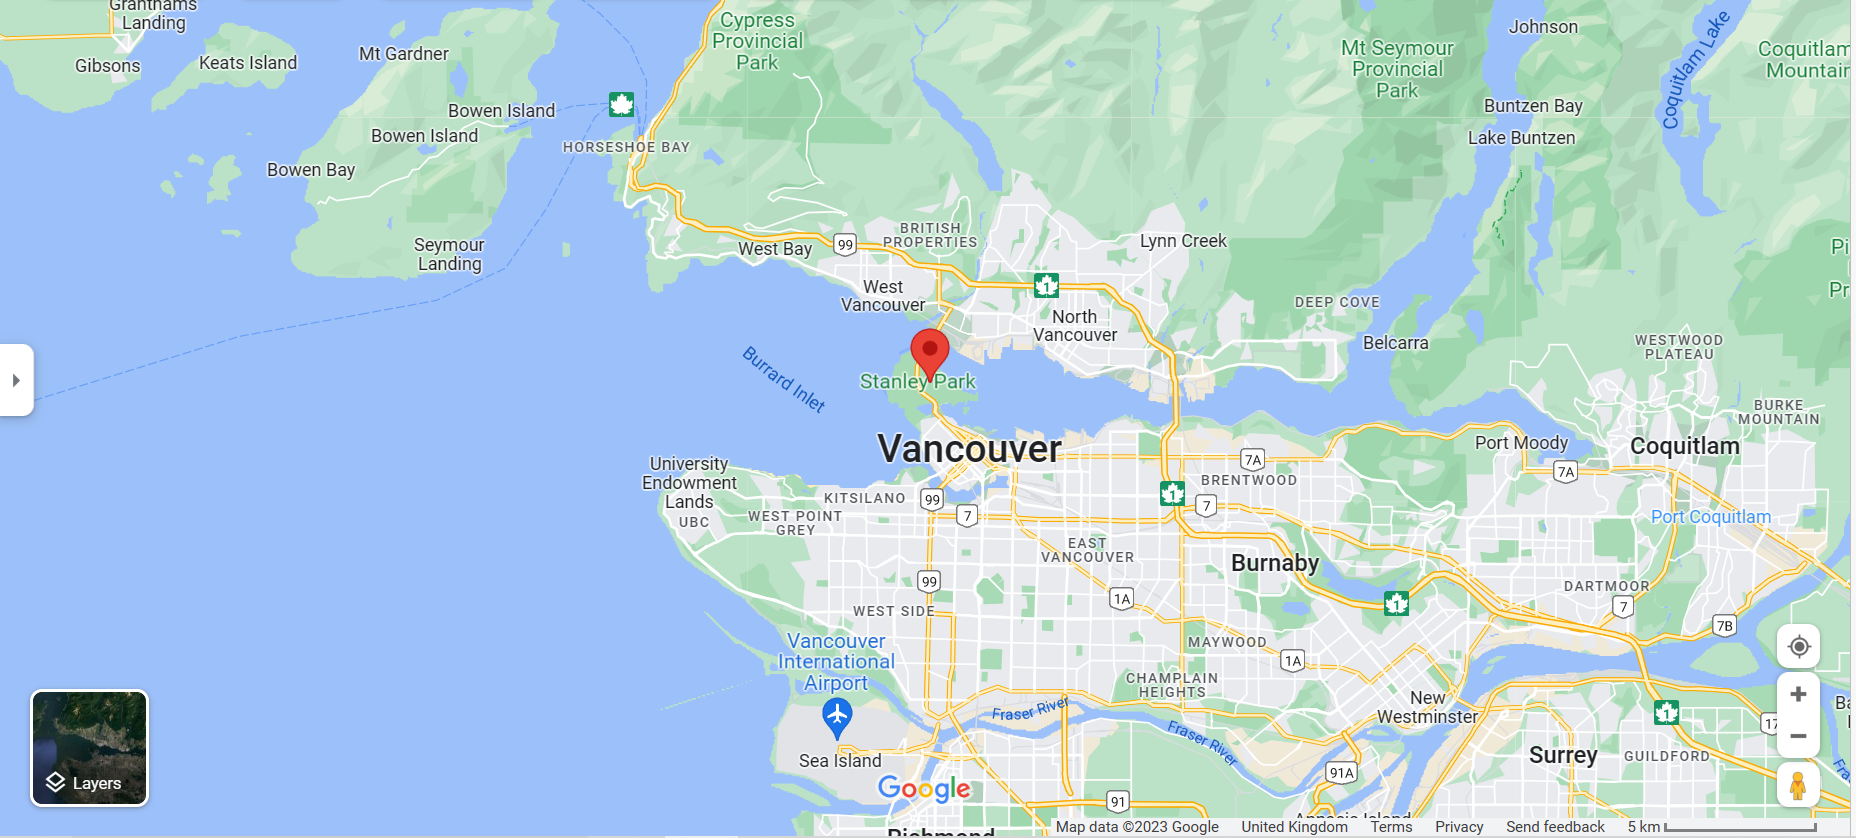 google map of Vancouver, specifically Stanley Park